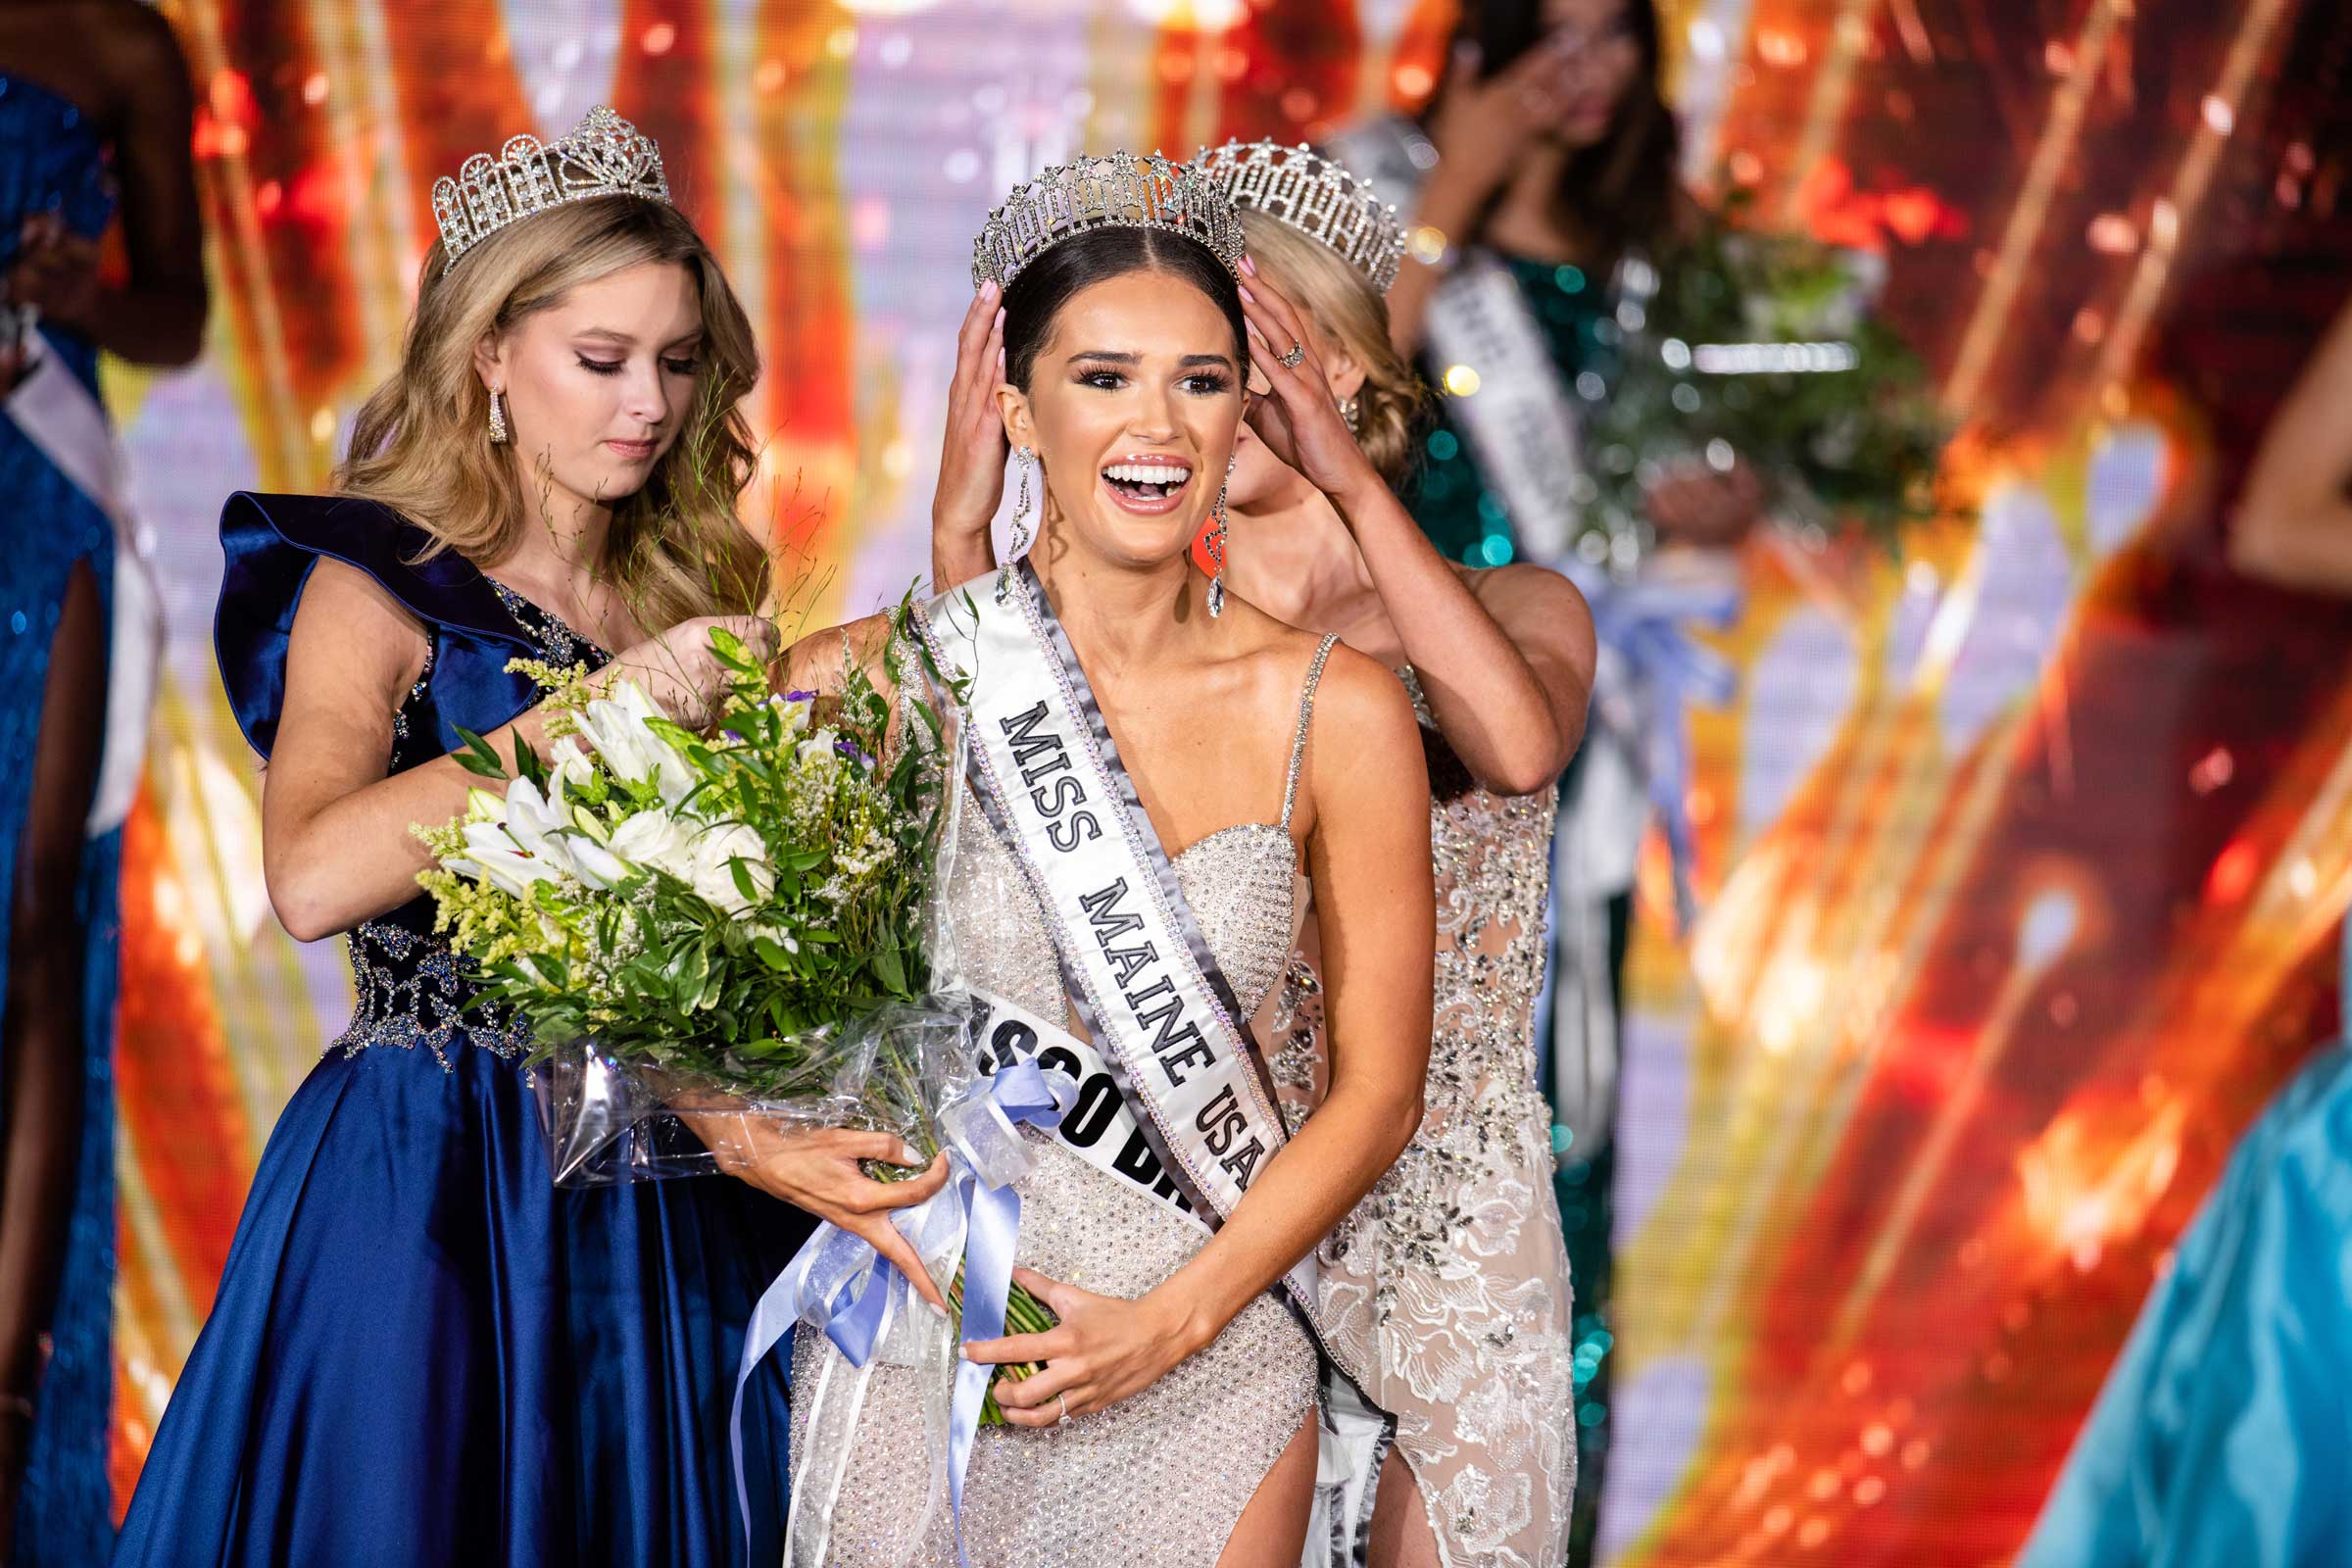 Juliana Morehouse is crowned Miss Maine USA 2023